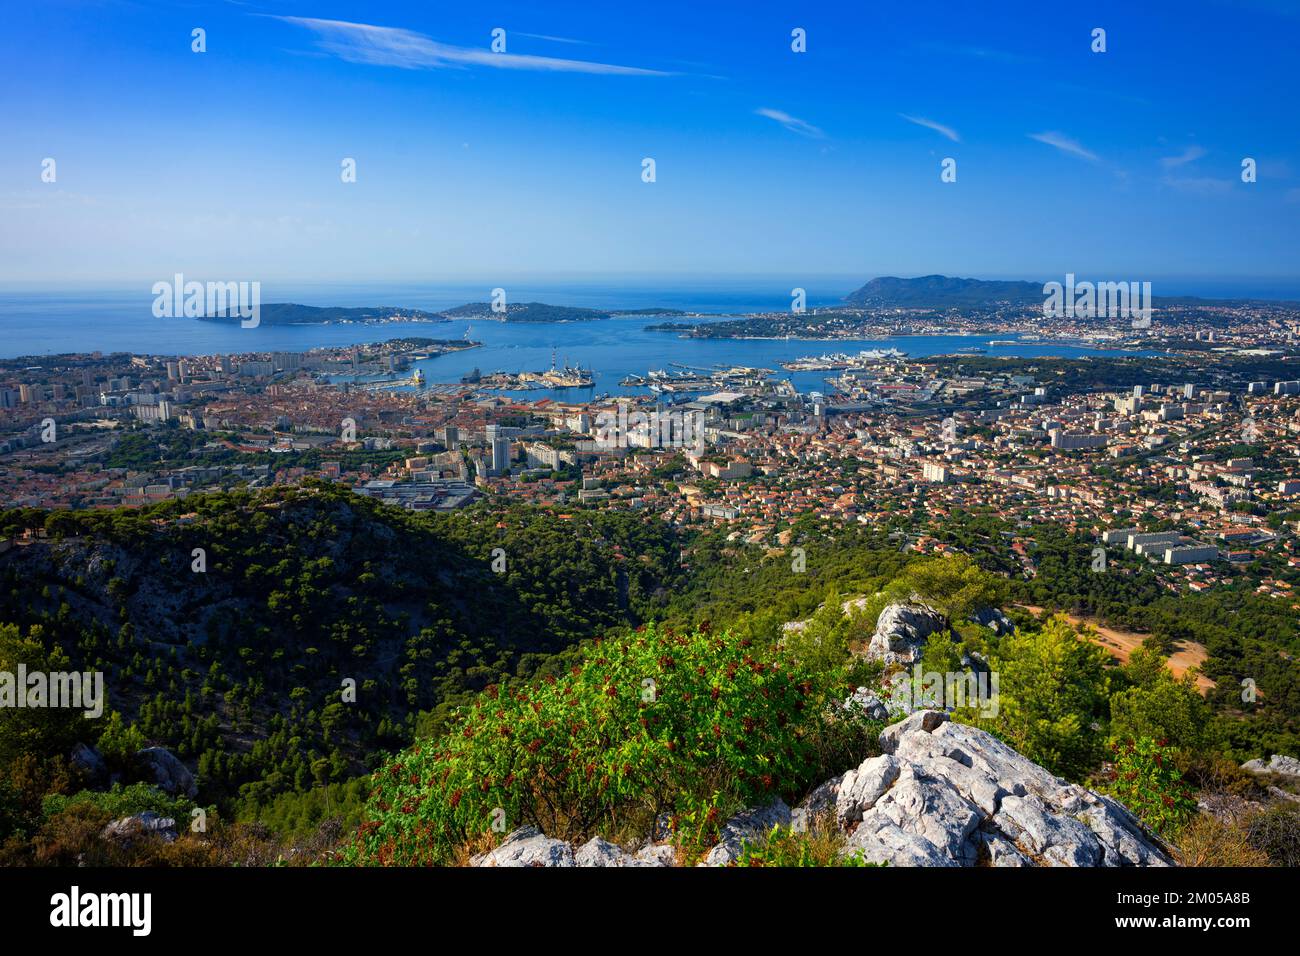 Famous view of Toulon from the top of the hill, France. Stock Photo